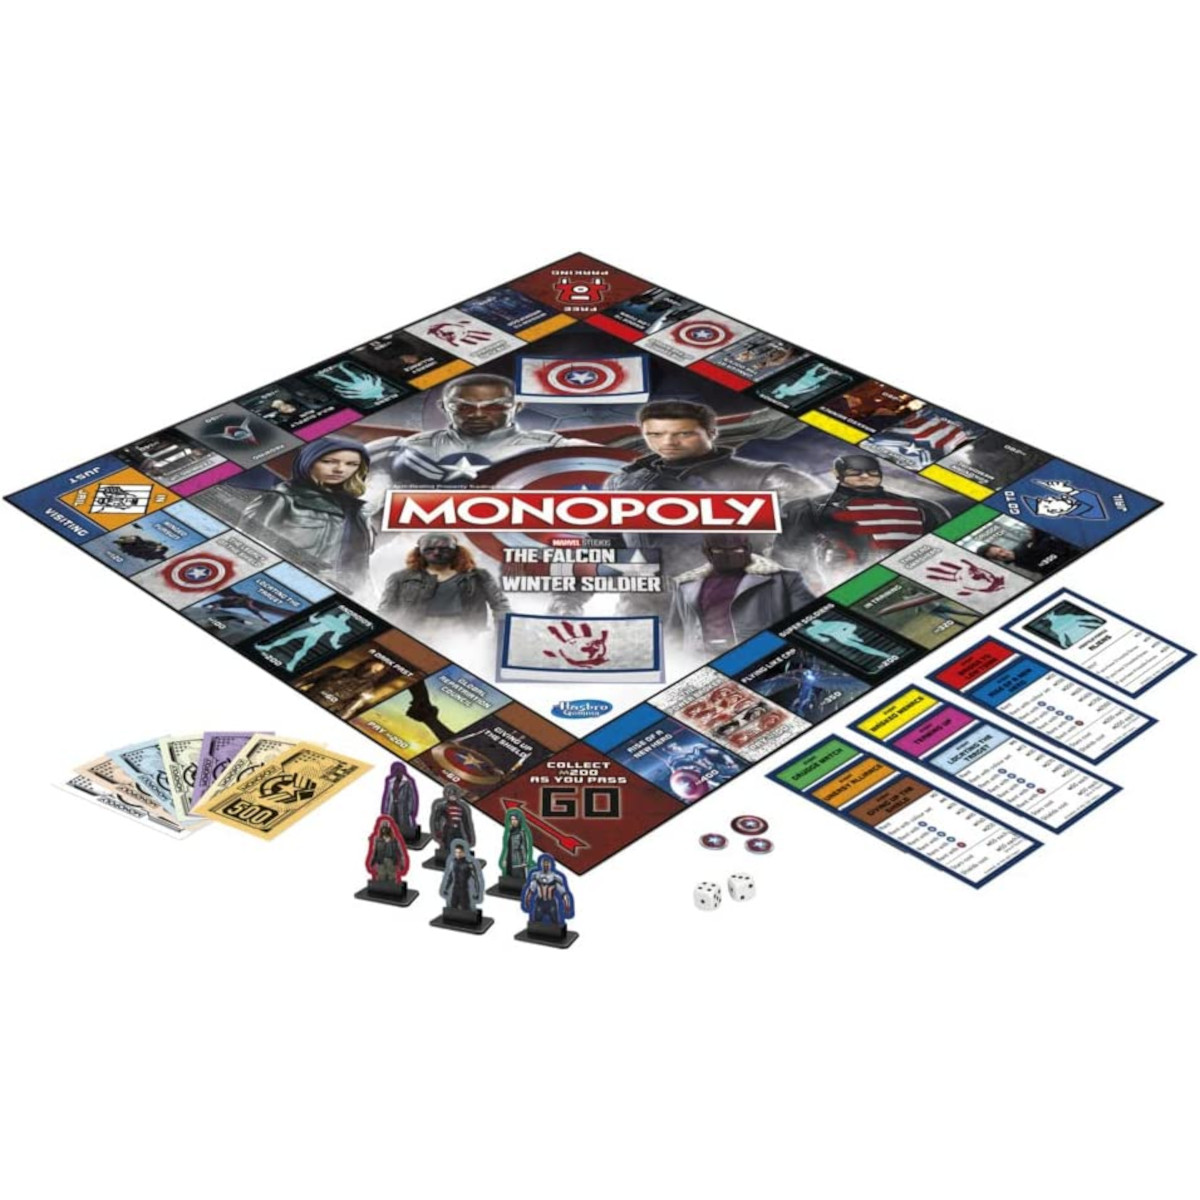 Monopoly - The Falcon and the Winter Soldier (englisch)